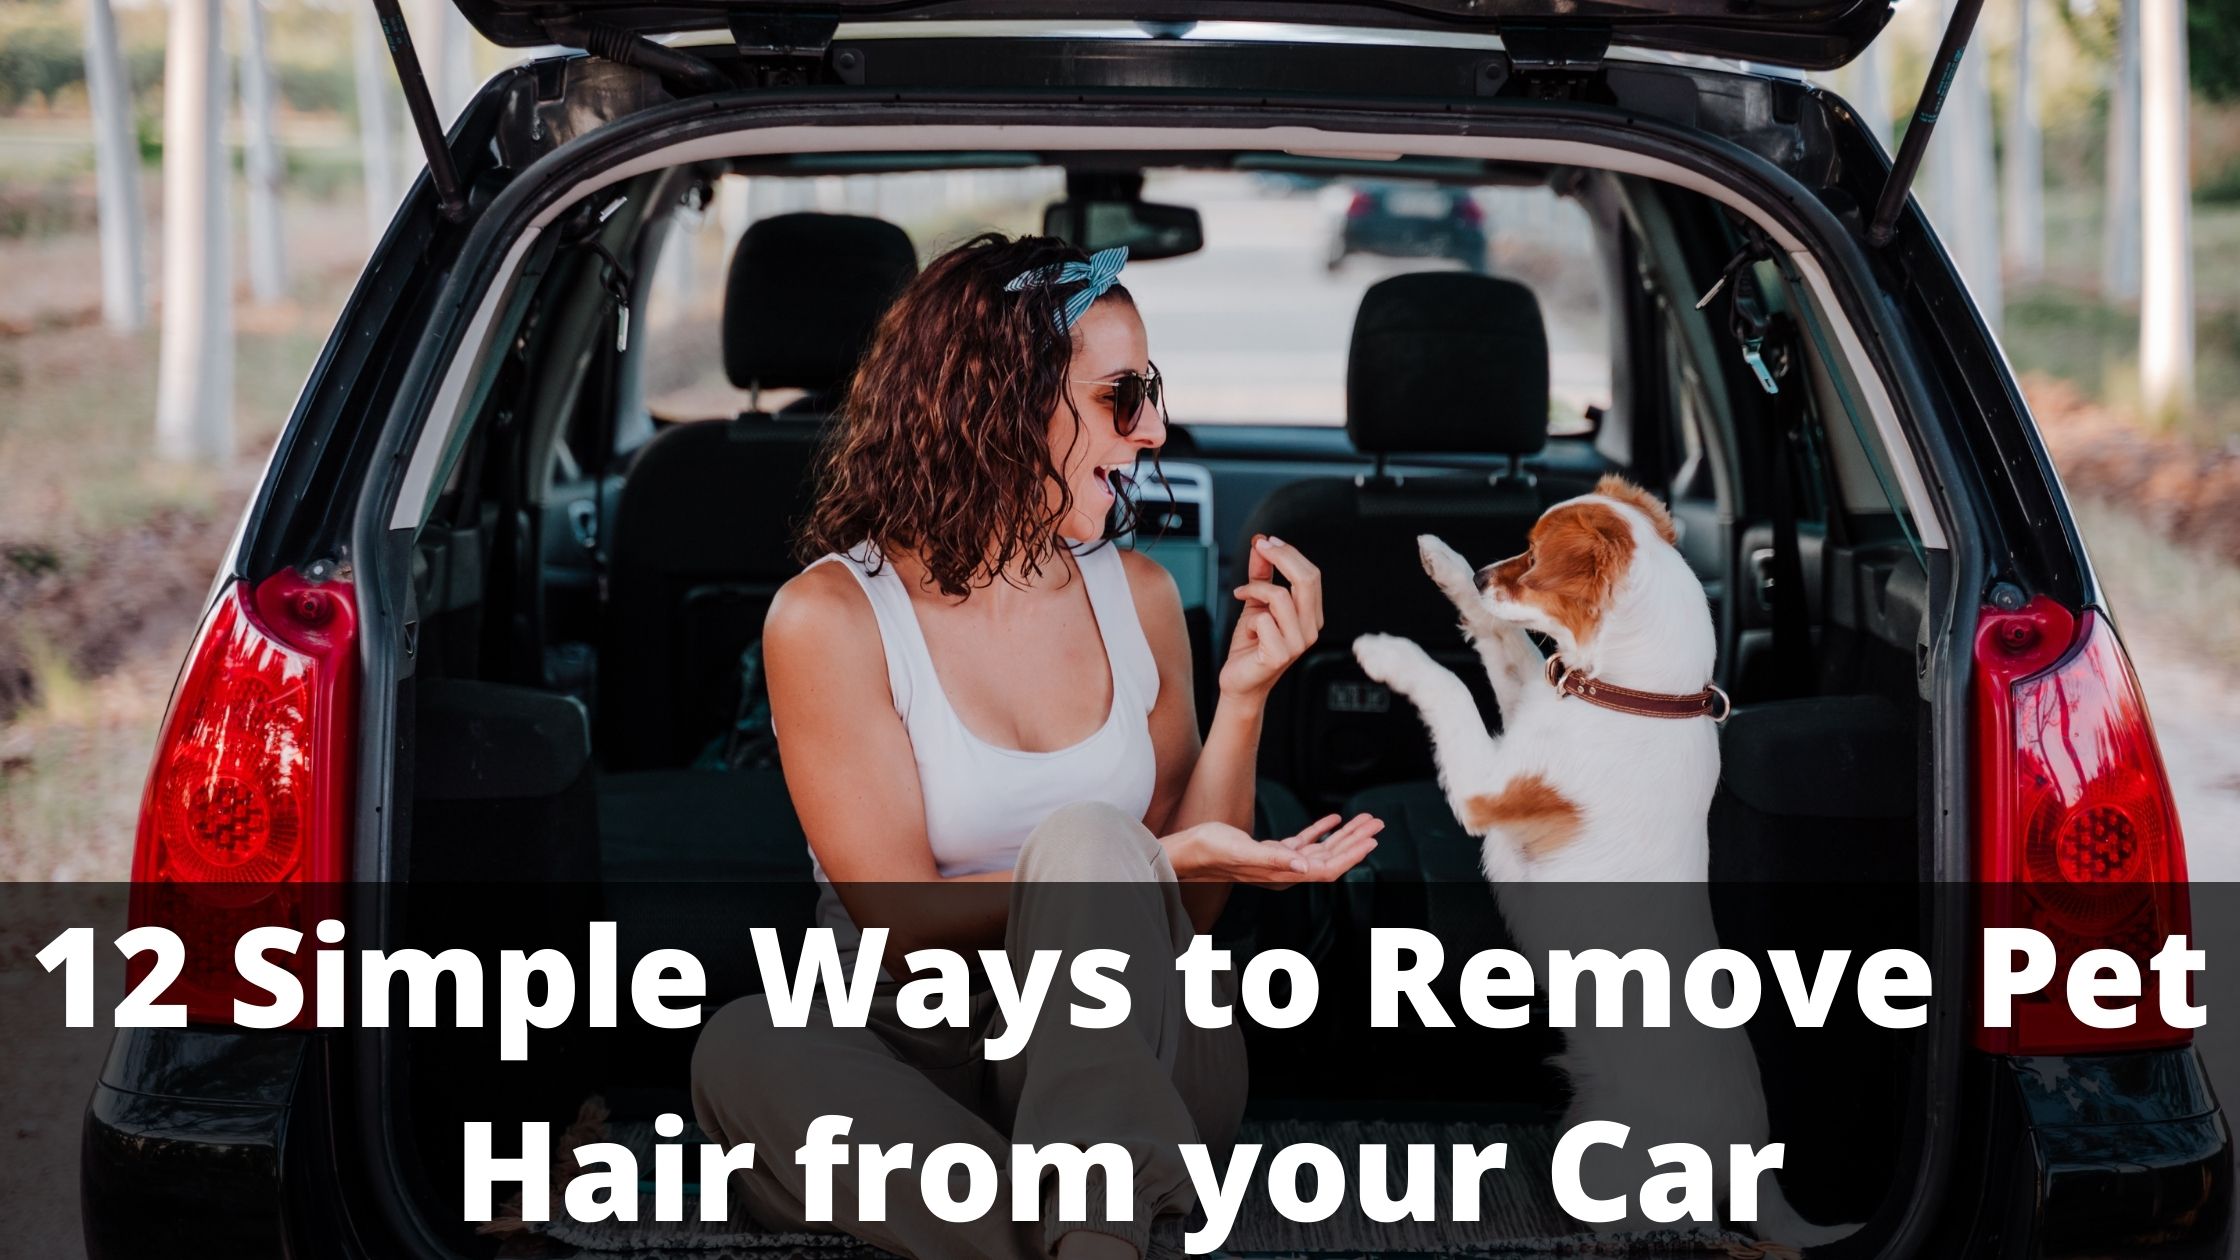 12 Simple Ways to Remove Pet Hair from your Car